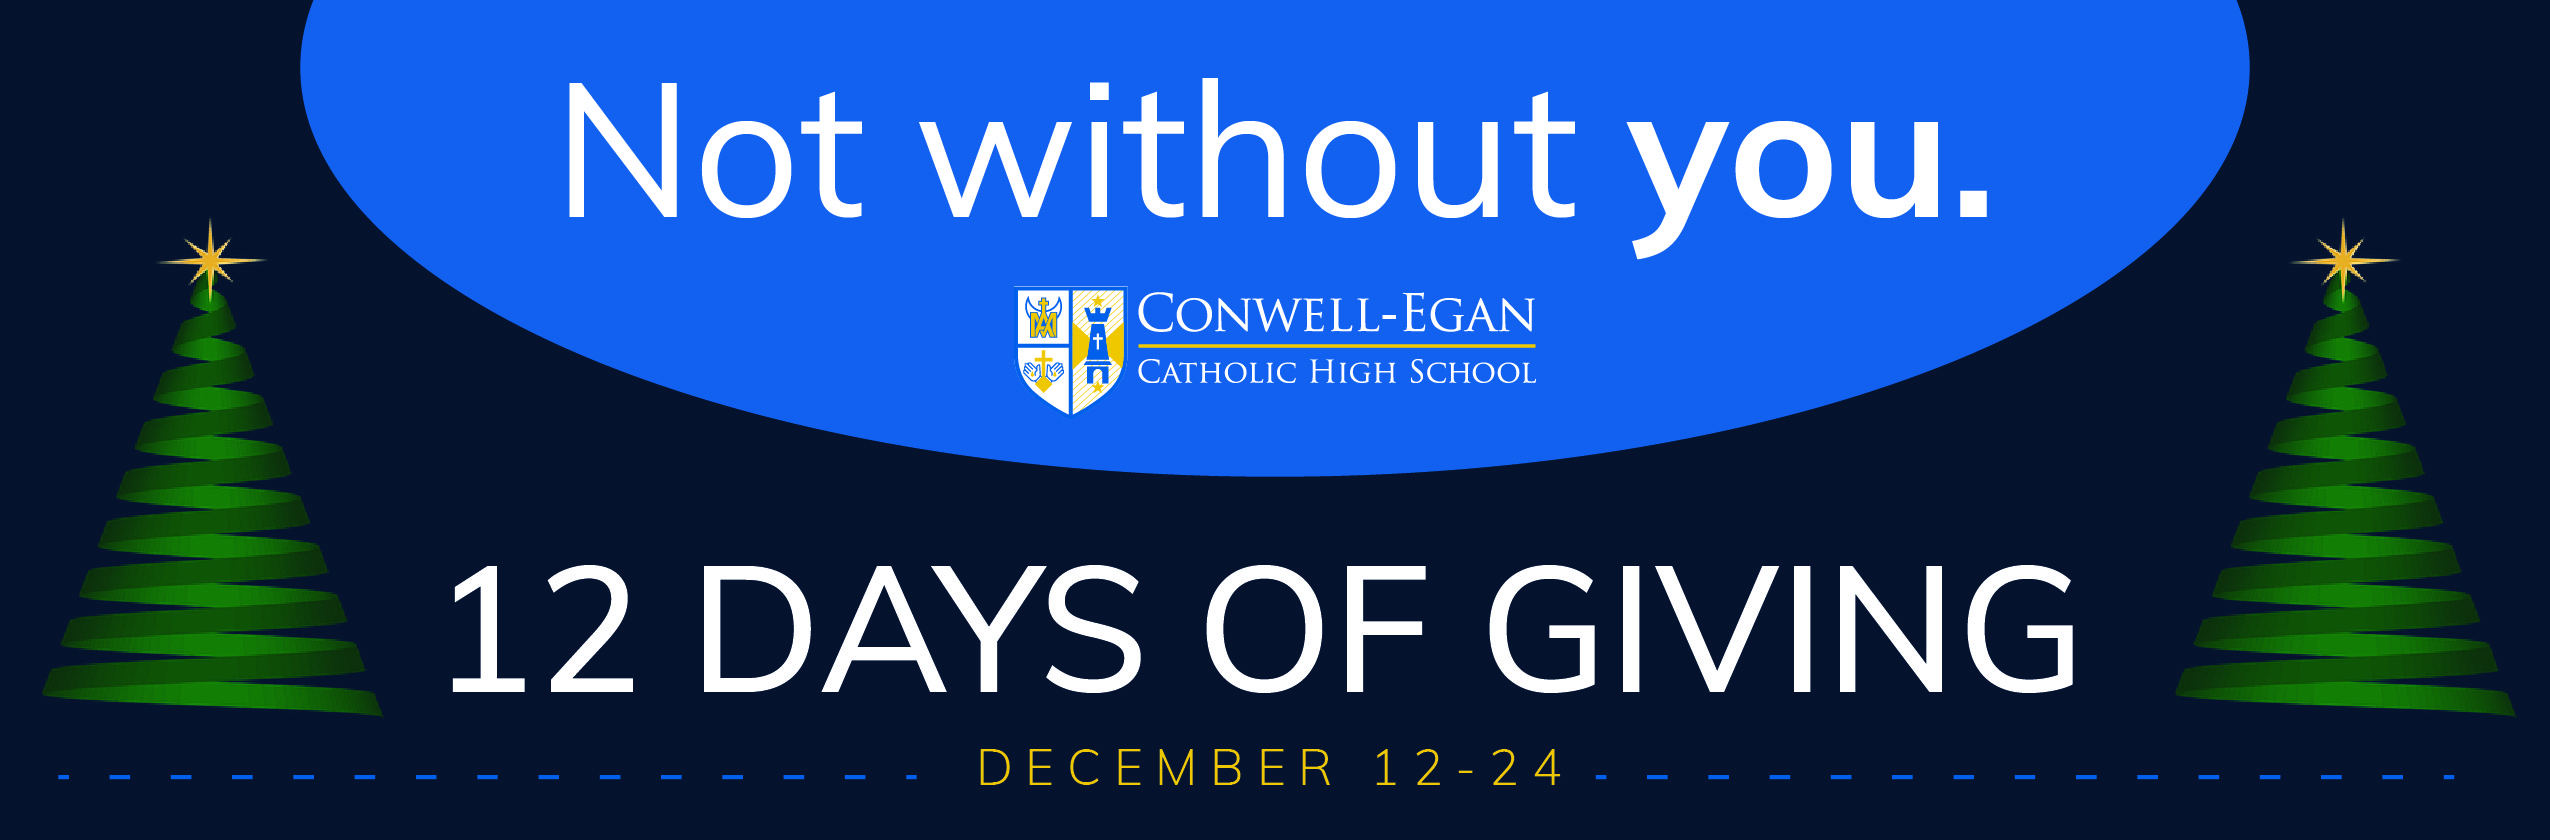 12 Days of Giving Banner